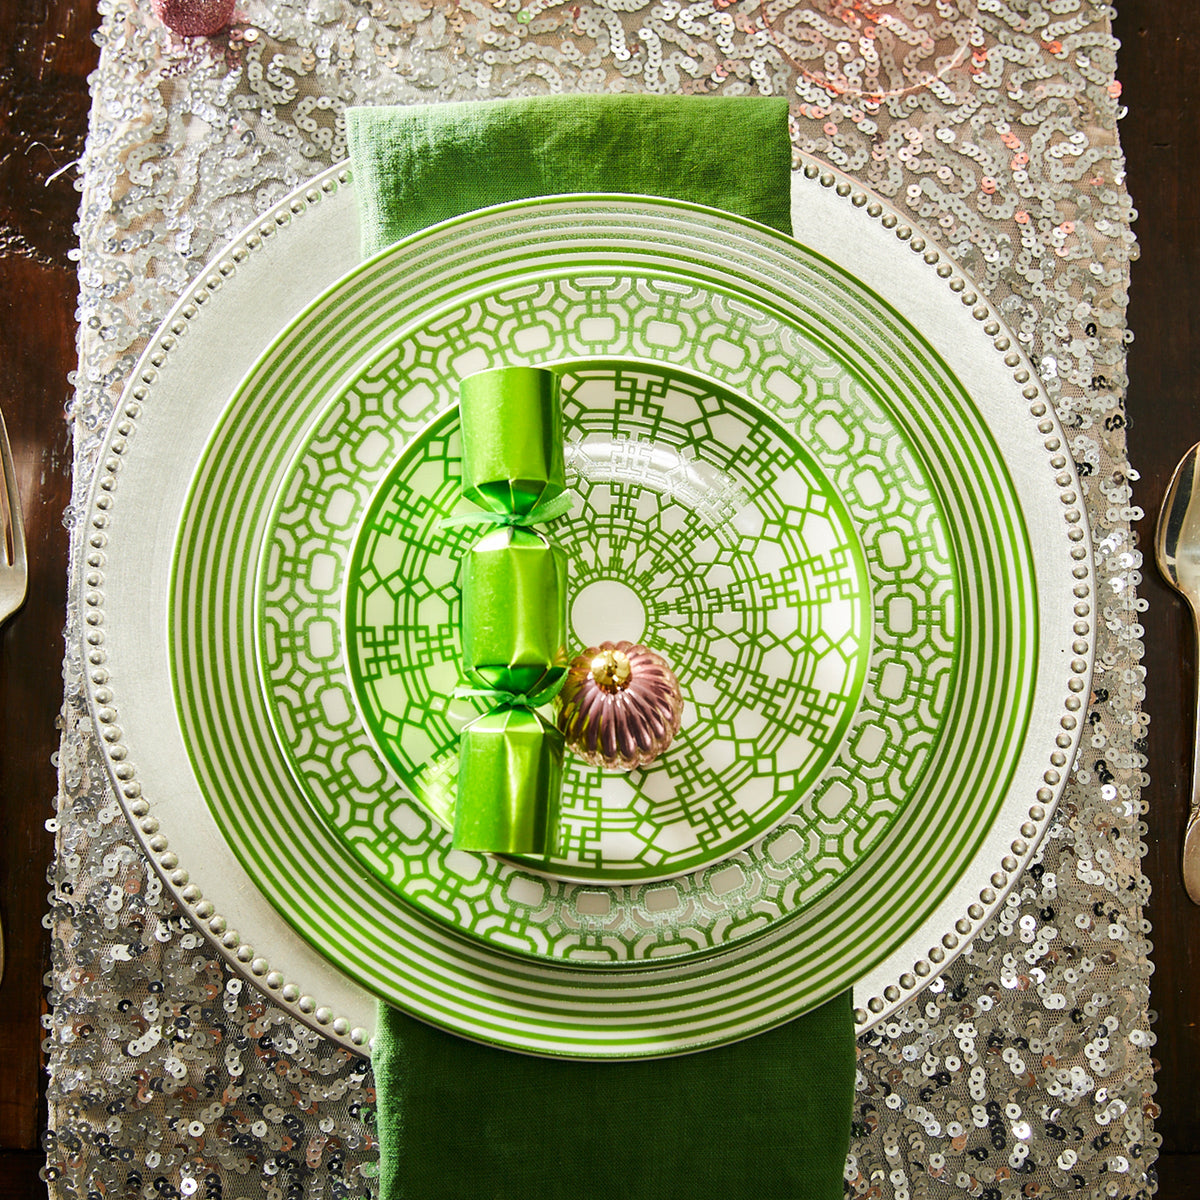 A place setting with a Caskata Artisanal Home Newport Garden Gate Verde Rimmed Salad Plate, green napkin, green cracker, and small pink ornament on a silver sequin tablecloth. This contemporary tableware arrangement evokes a sense of elegance reminiscent of the Newport Garden Gate charm.